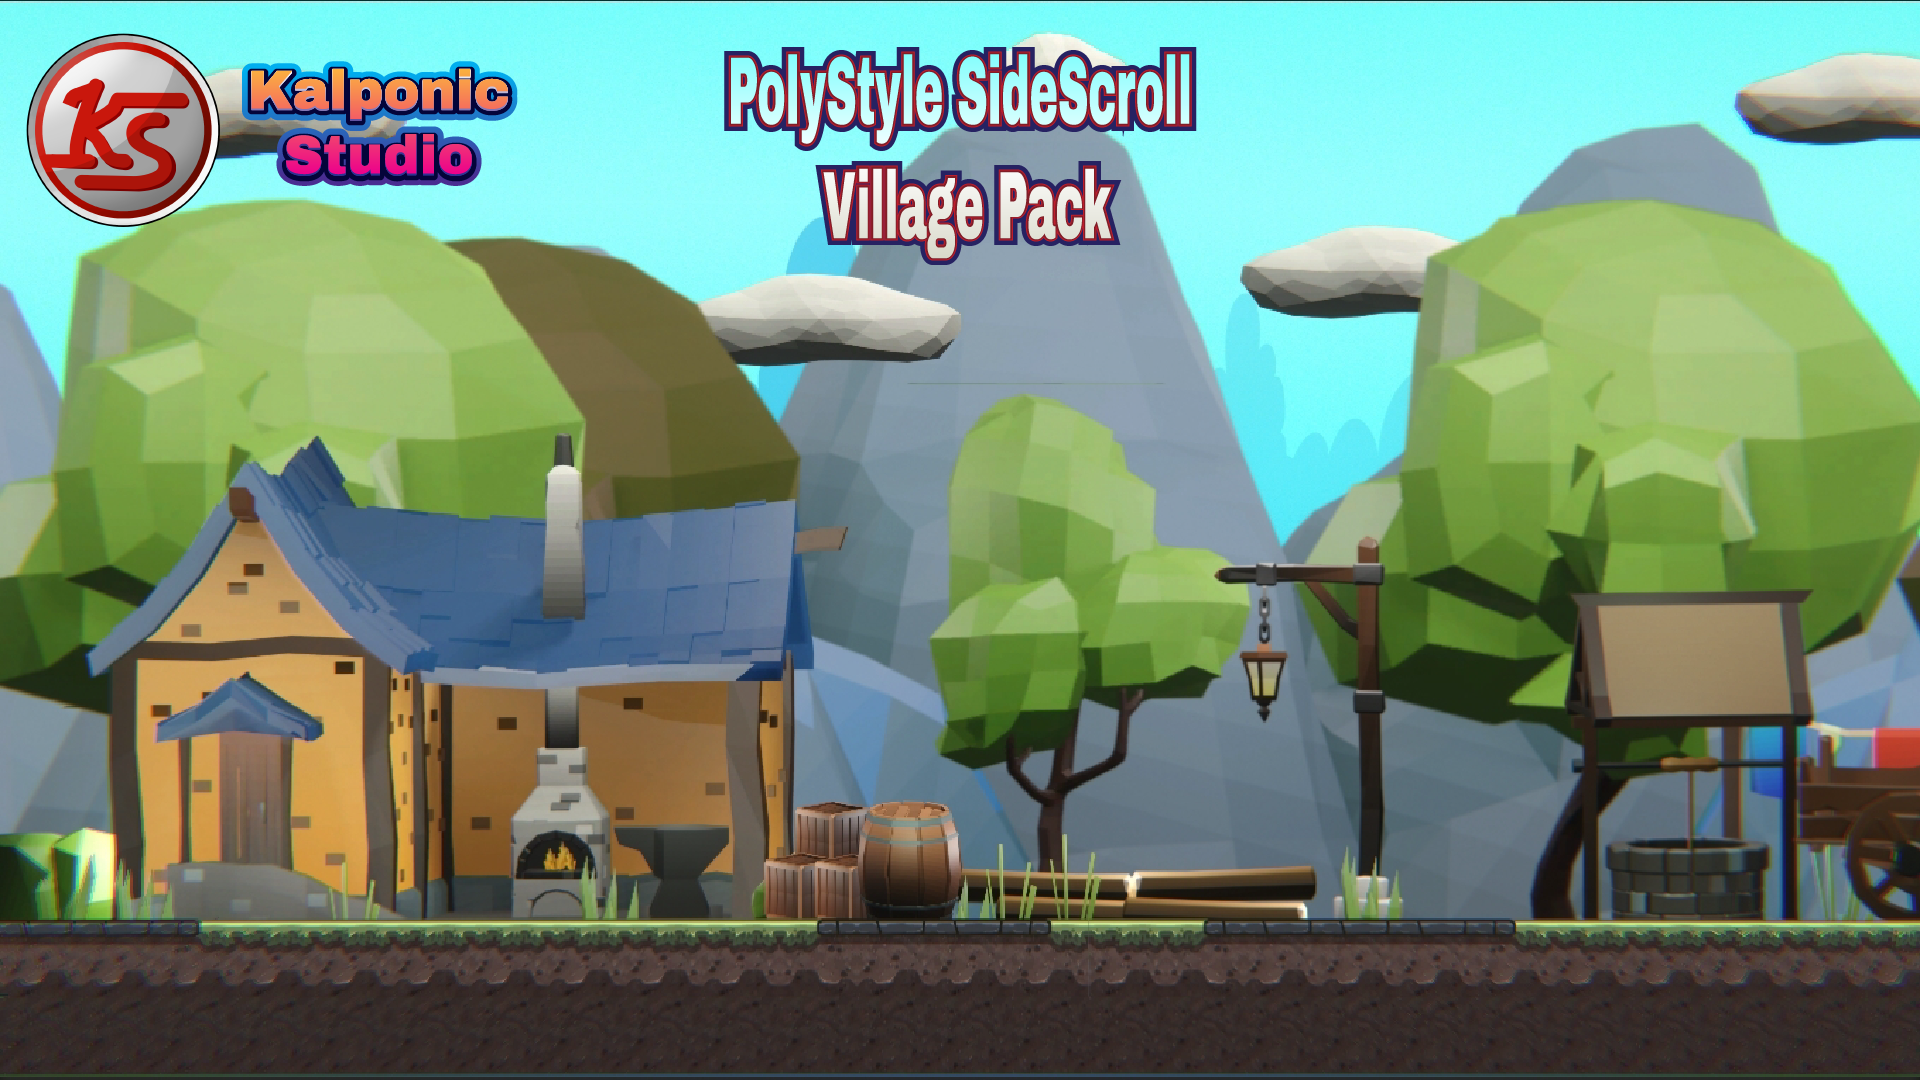 PolyStyle SideScroll Village Pack